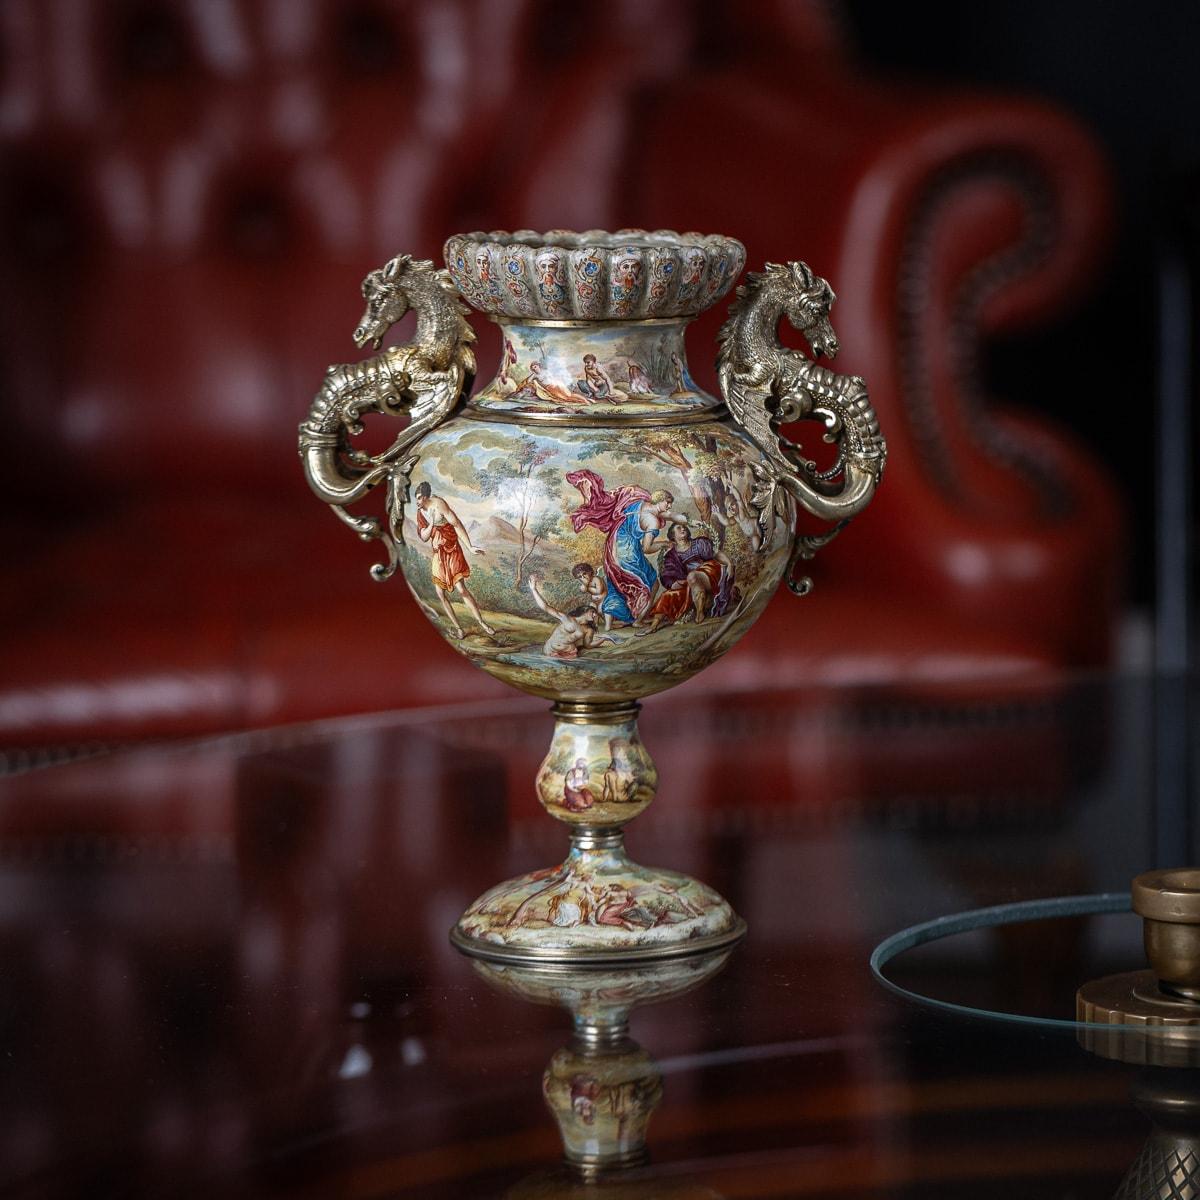 Antique late-19th Century Austrian exceptional solid silver gilt & enamel twin handled vase. Perched atop an oval base, its bulbous stem gracefully rises, while the body boasts intricate hand-painted classical allegorical scenes. Adorning its sides